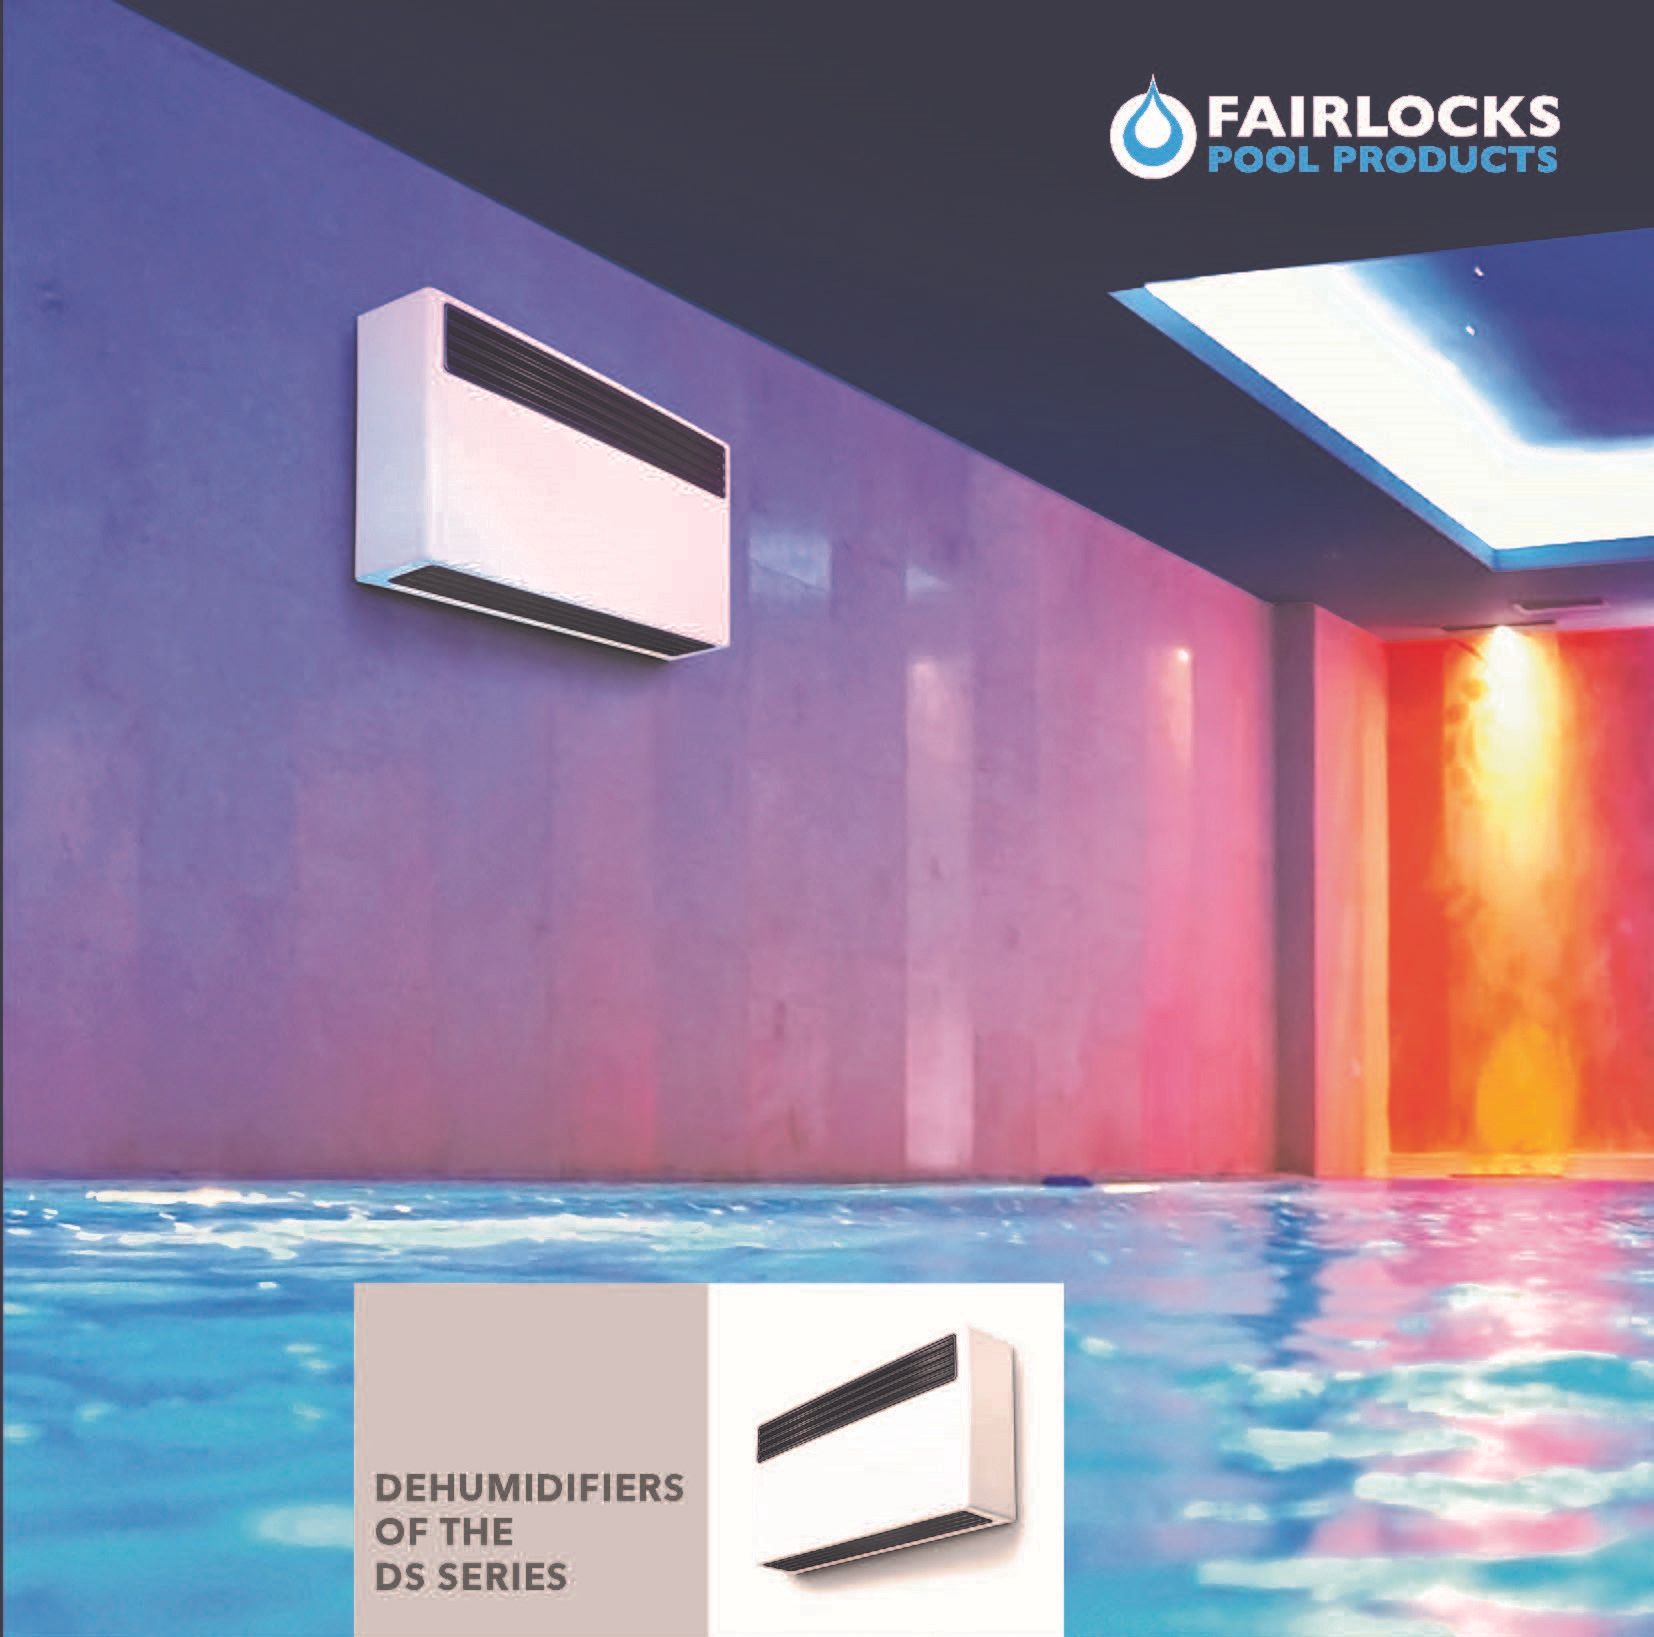 FAIRLOCKS POOL PRODUCTS - Now in stock - Trotec Dehumidifiers